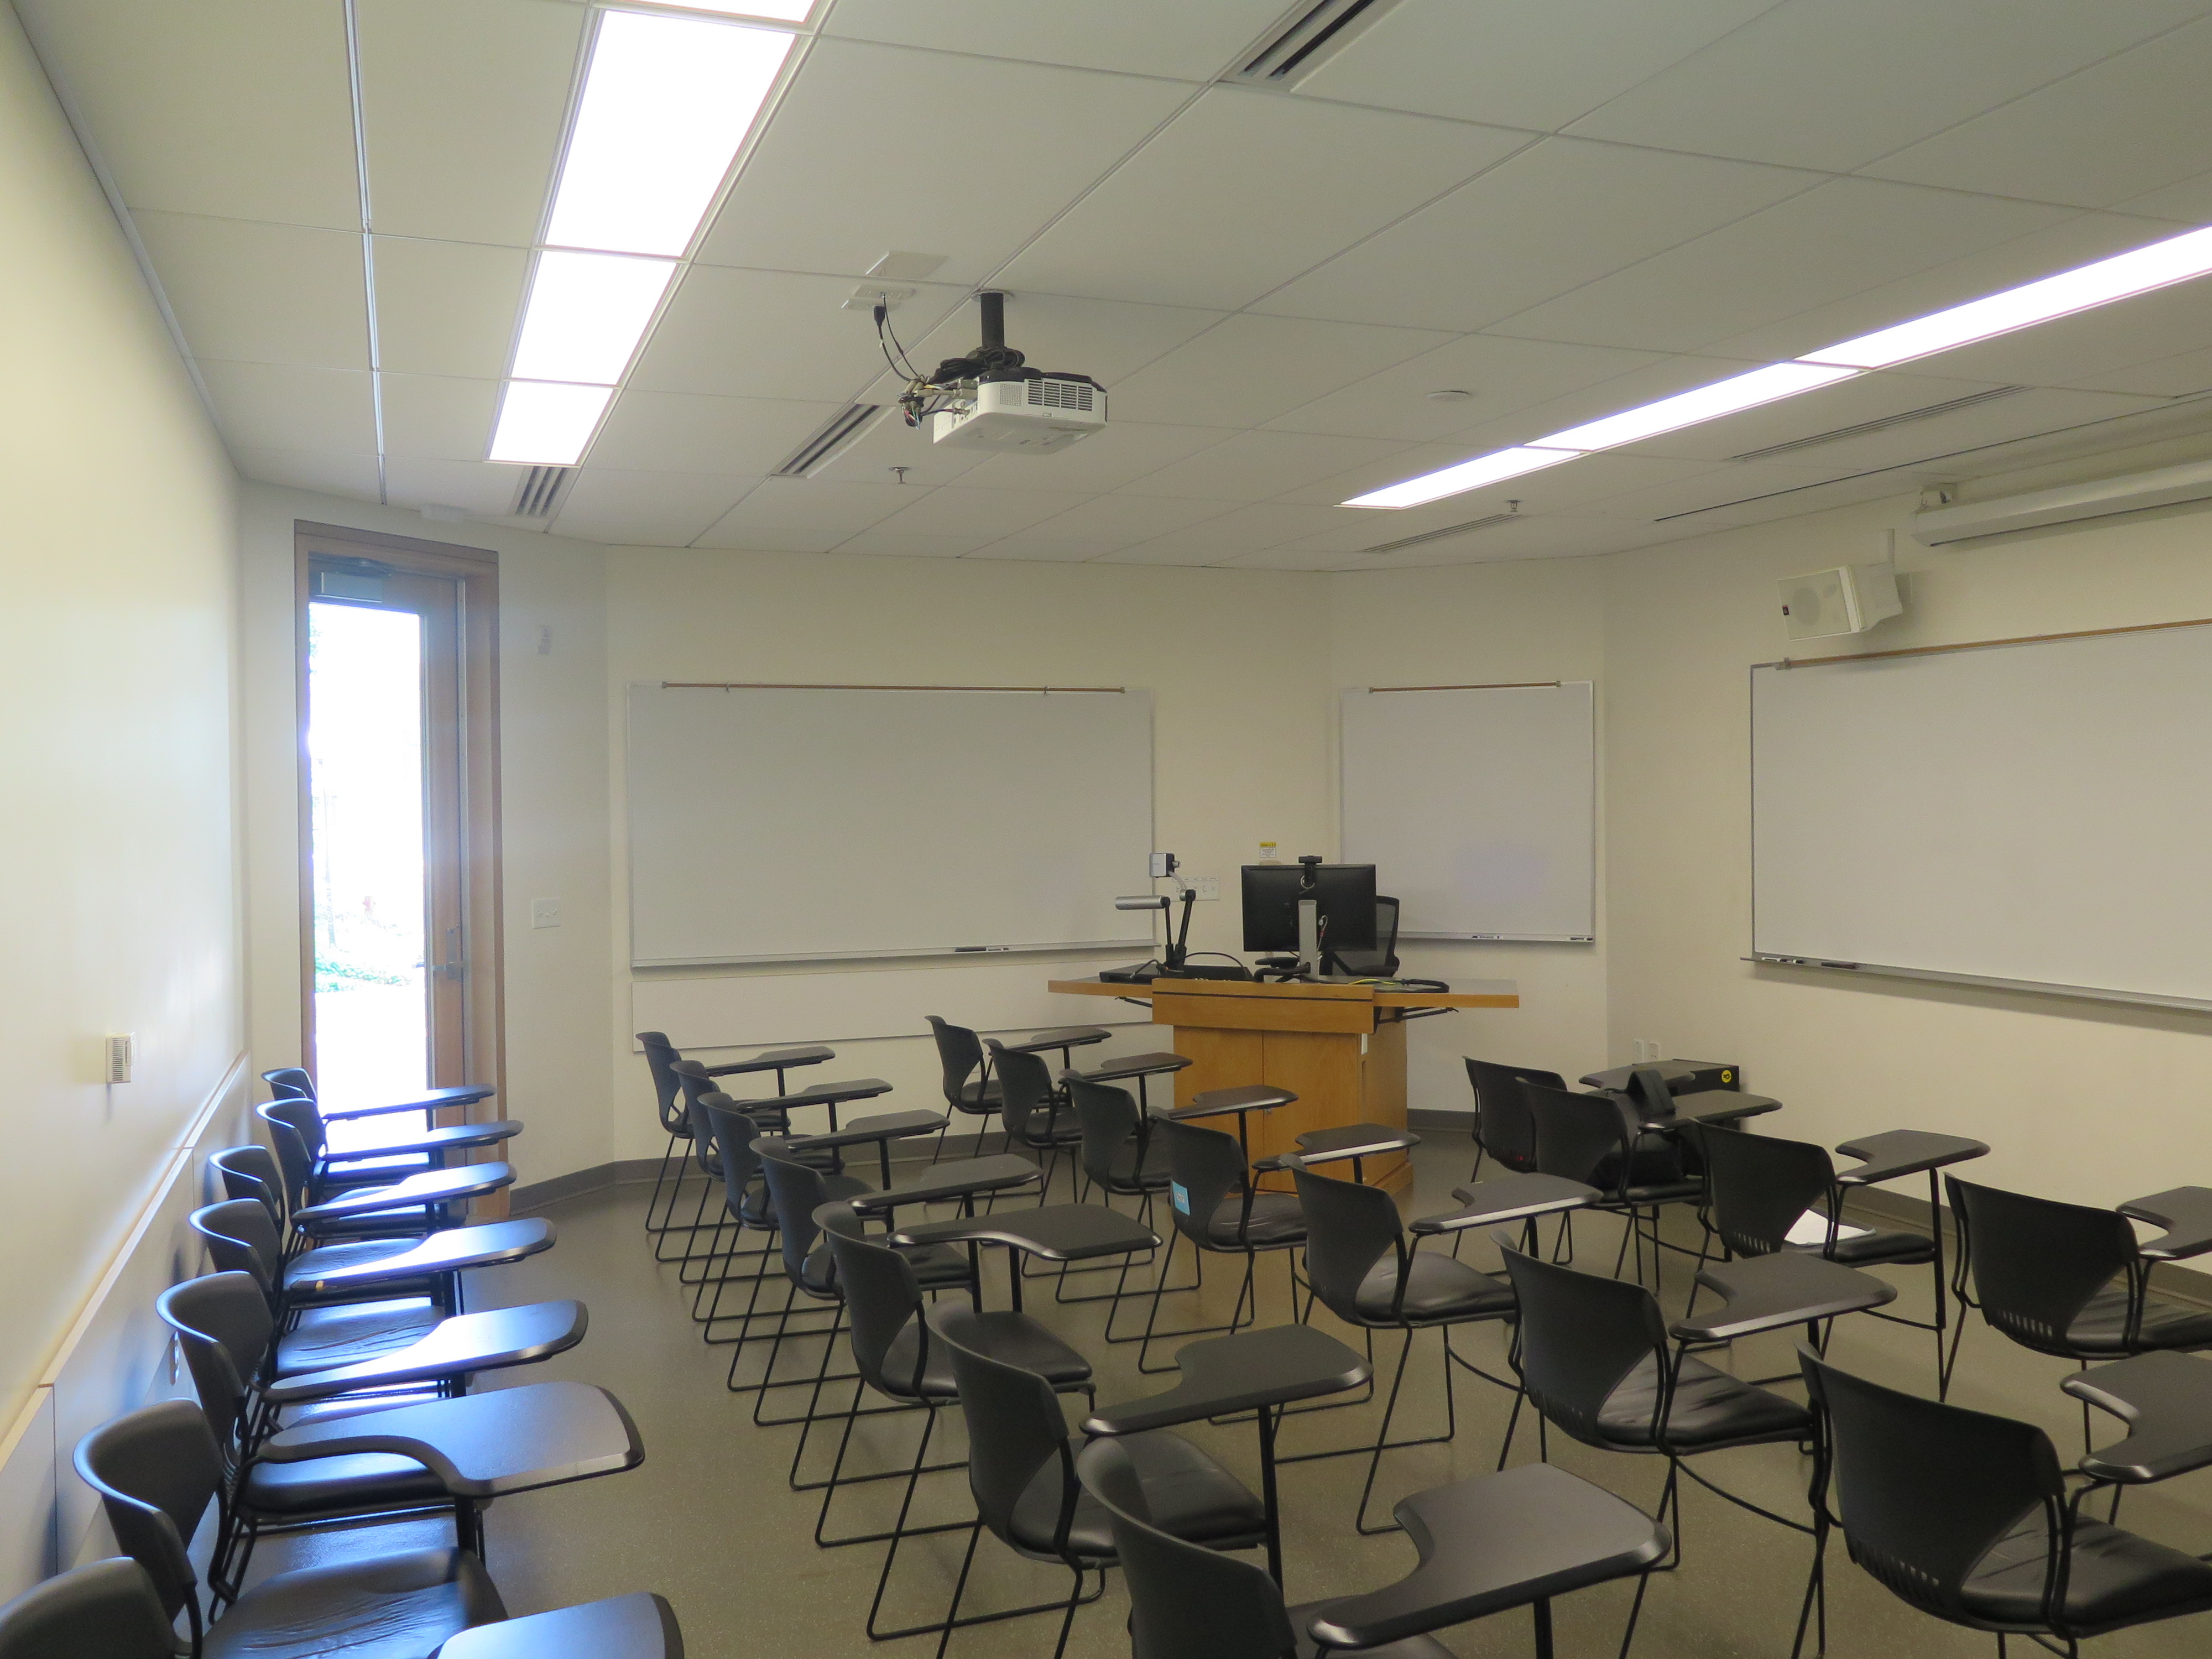 Room Consists of hard floors, moveable tablet armchairs, a white board and podium are both located at the front of the room and whiteboards on the outer walls of the room.